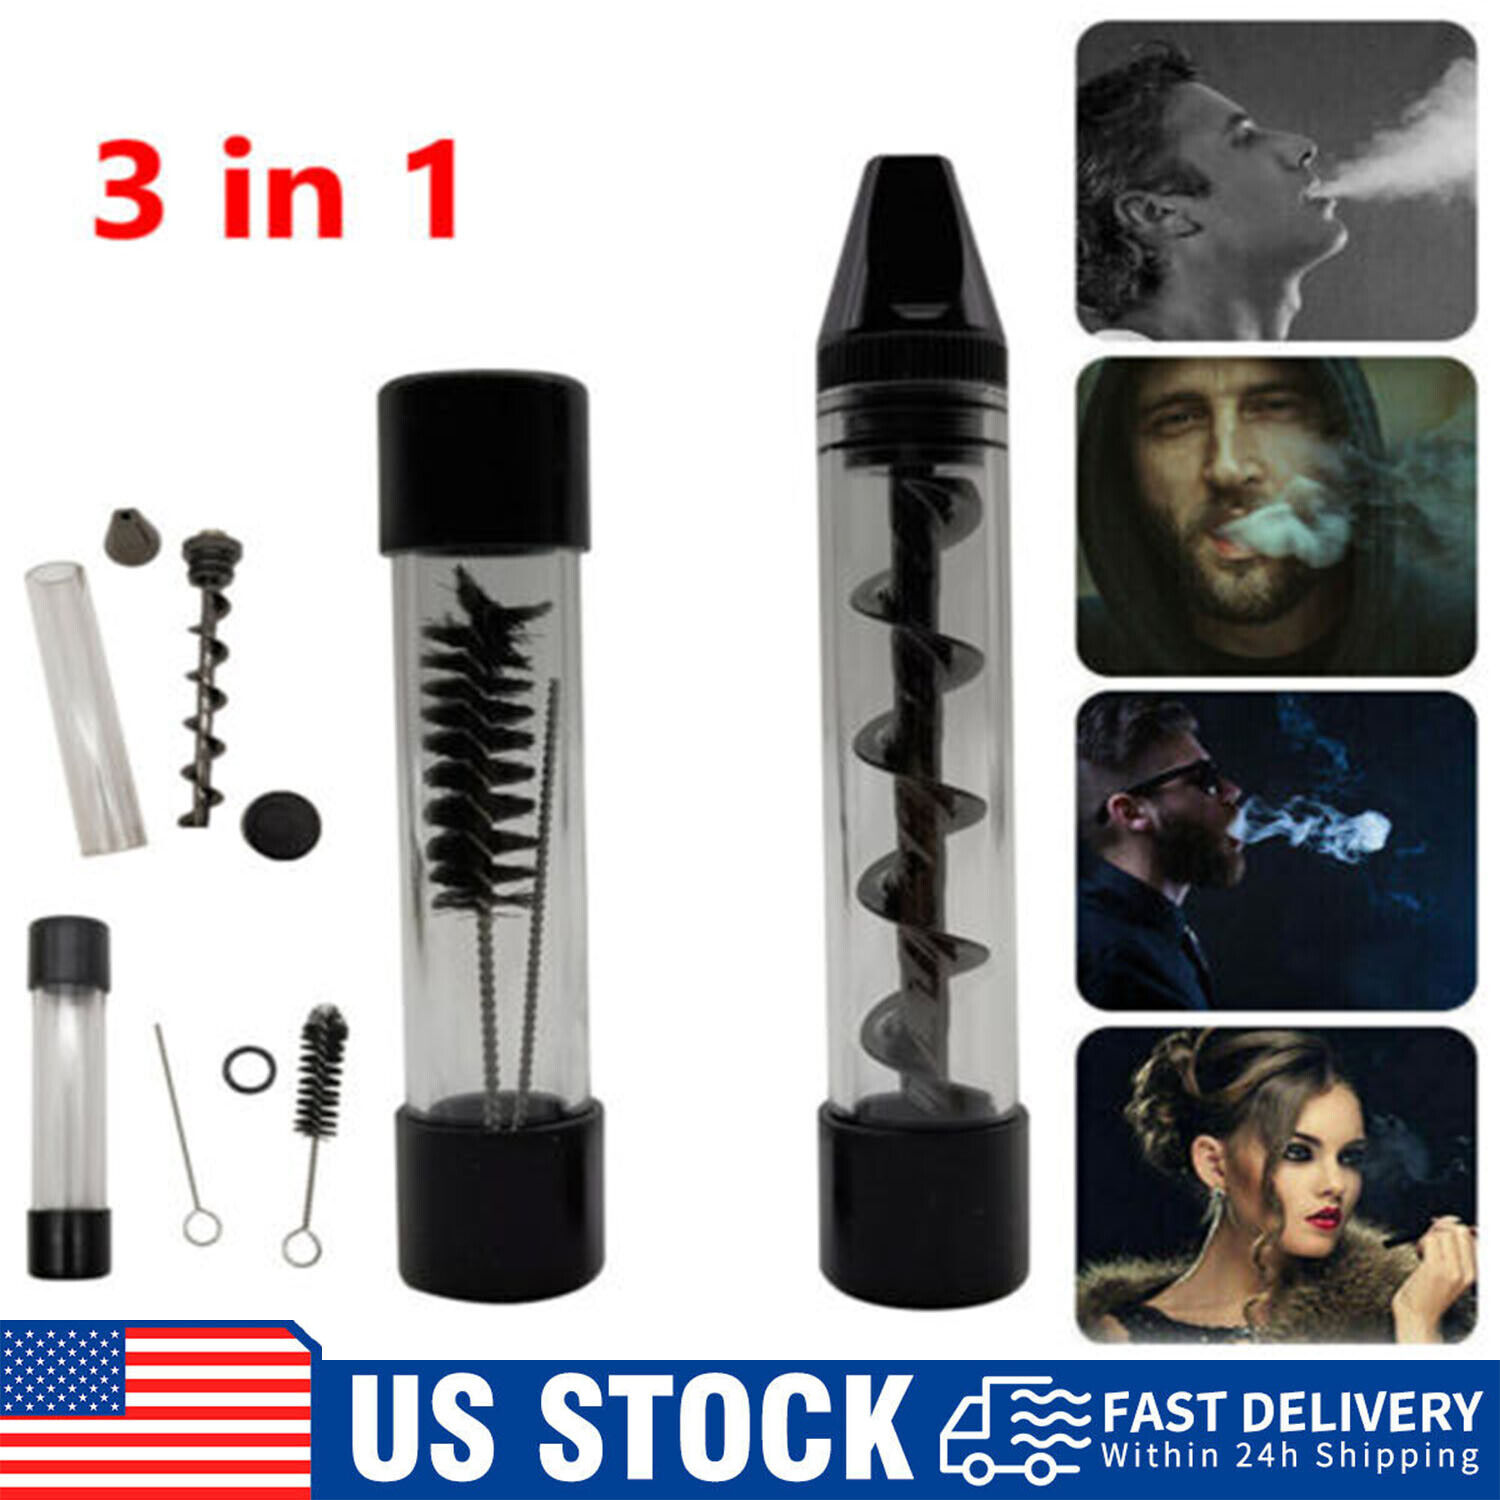 3in1 Twisty Glass Blunt Smoking Mini Pipe Metal Tip With Cleaning Brush Upgraded